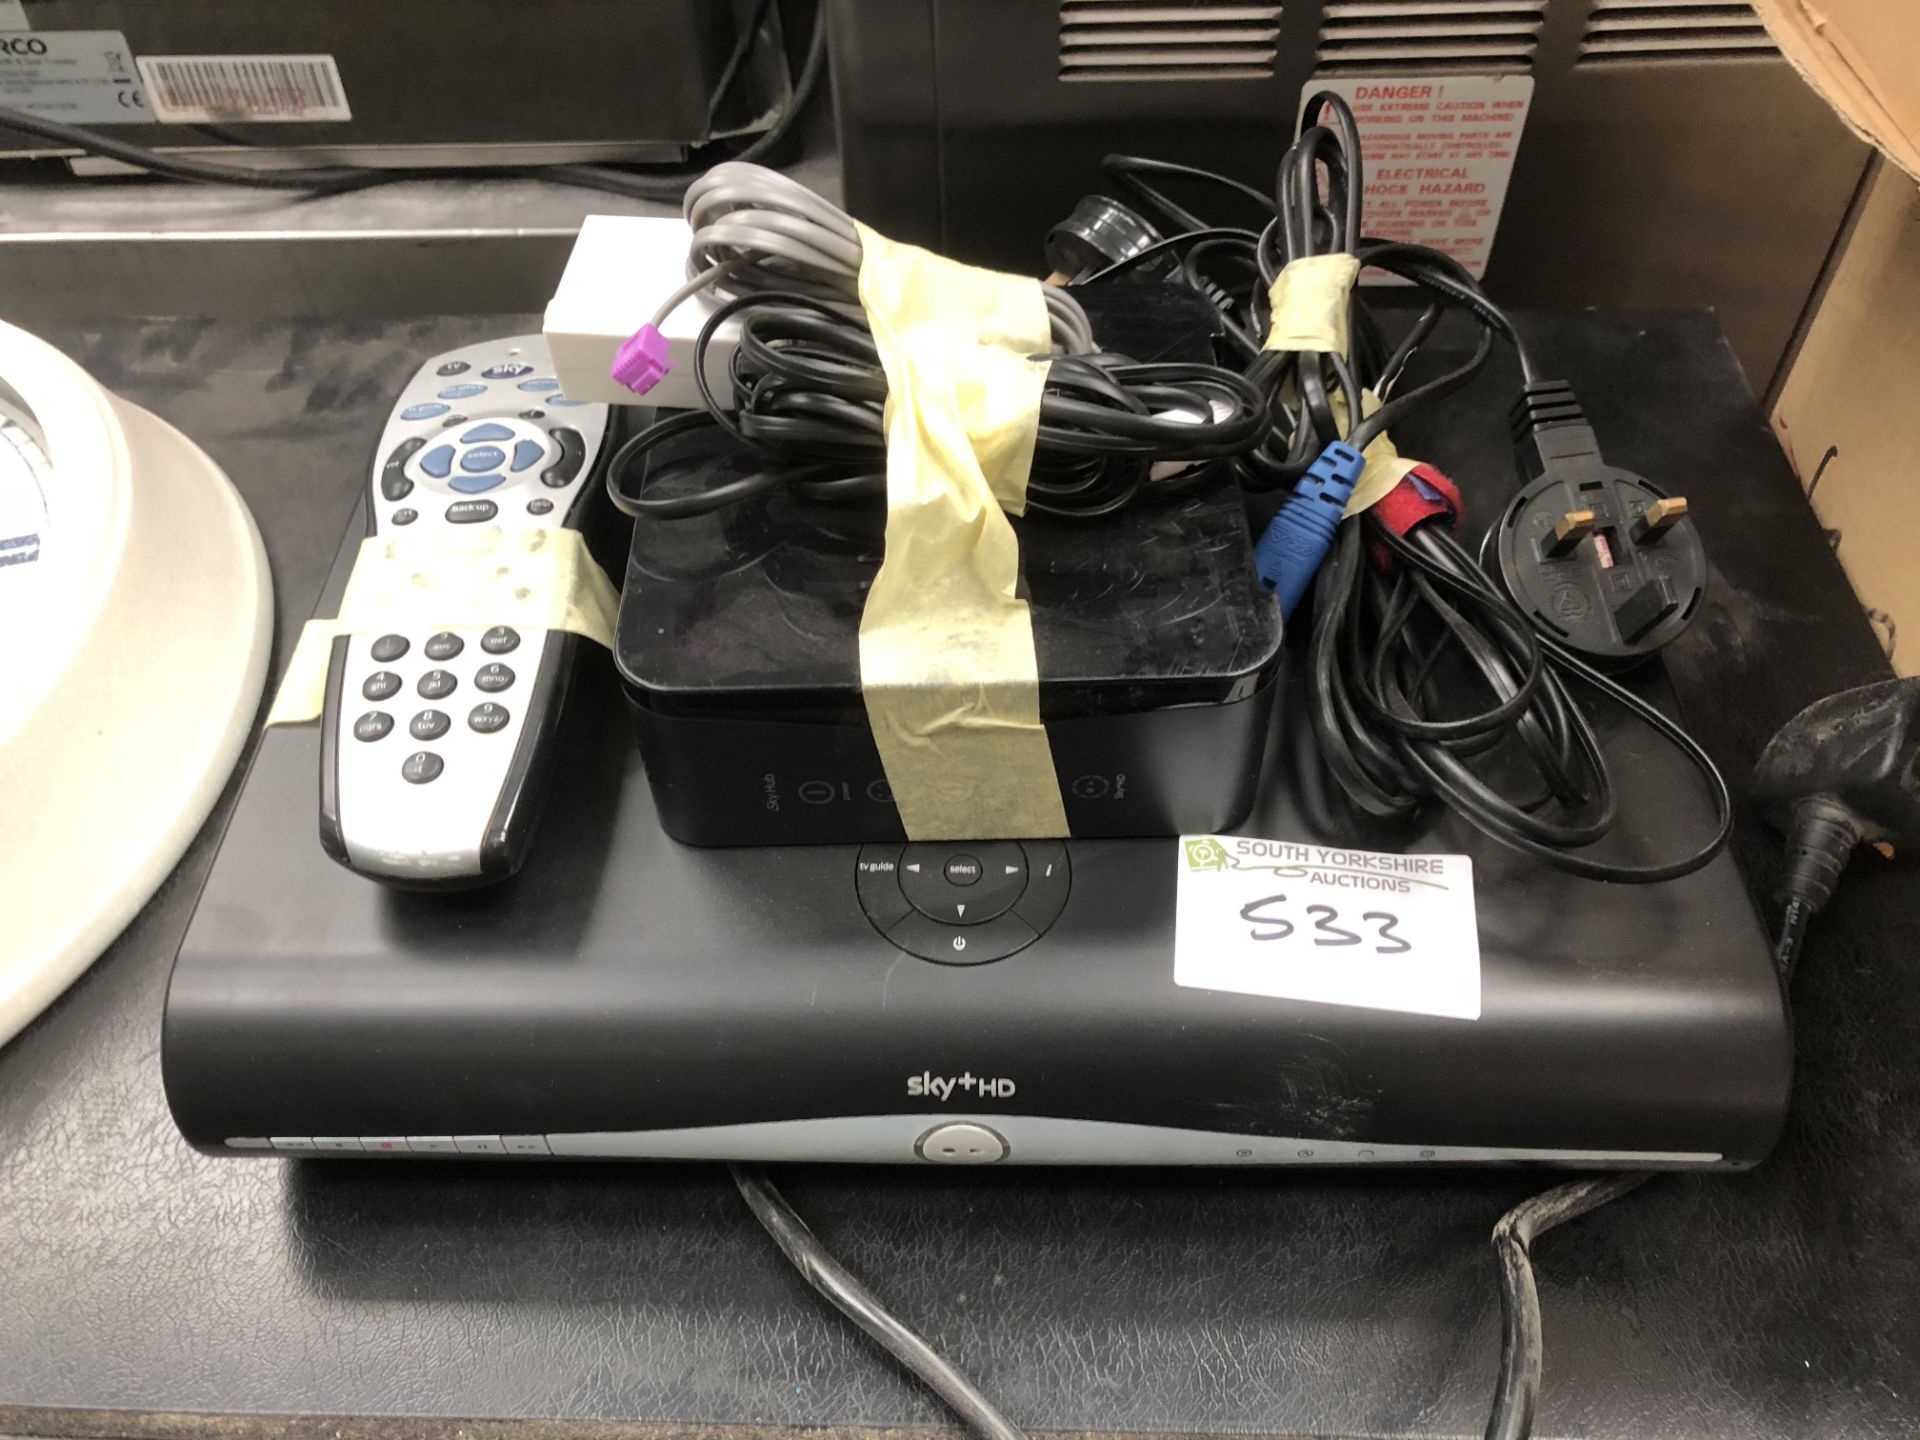 Sky Box, Modem, Controls and Wires